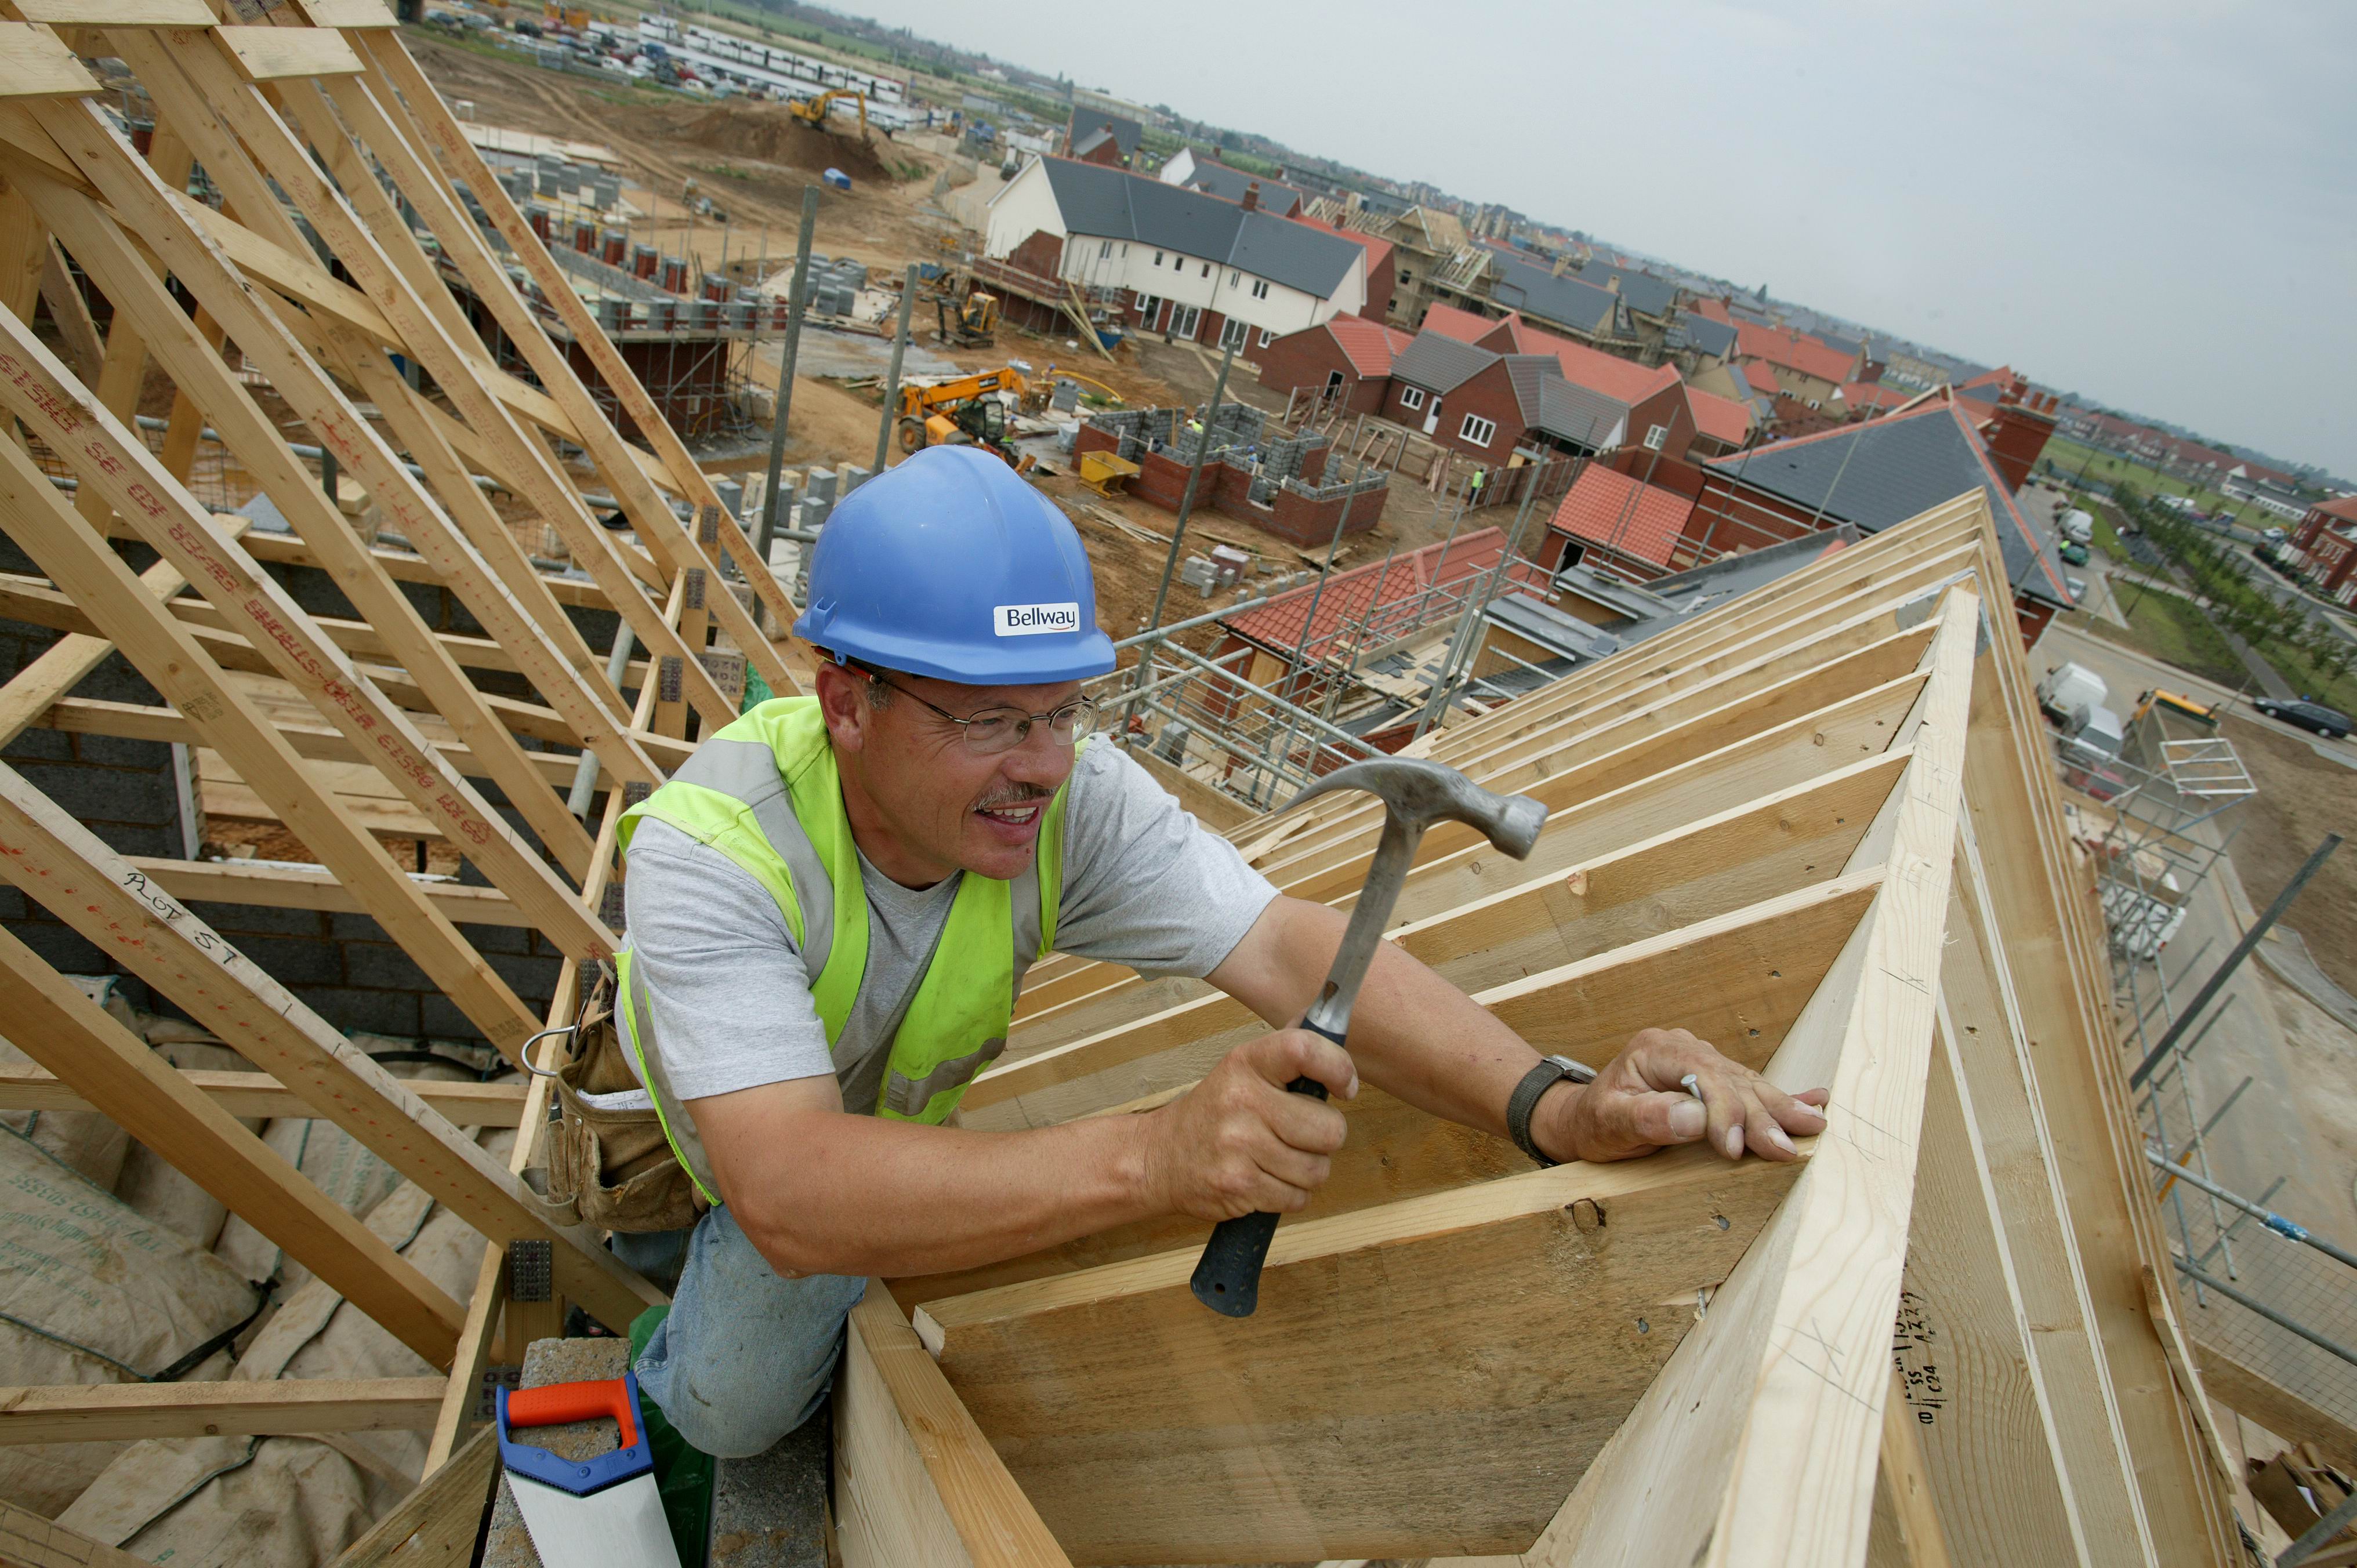 Public housing and infrastructure help ease Scottish construction decline